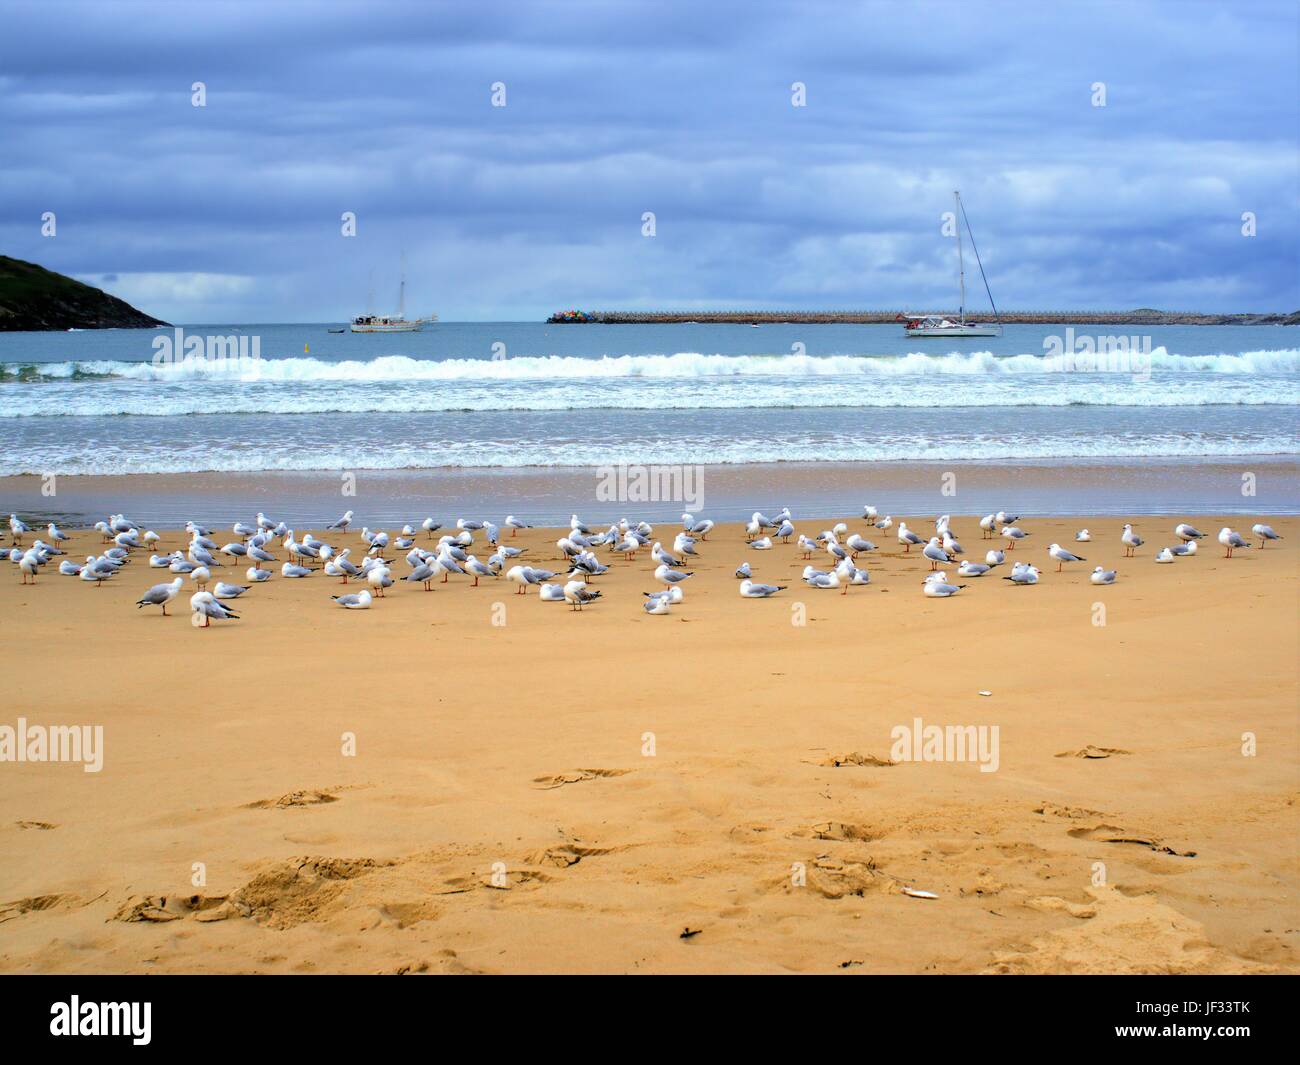 View of seagulls, island and breakwater from a beach in Coffs Harbour, Australia Stock Photo